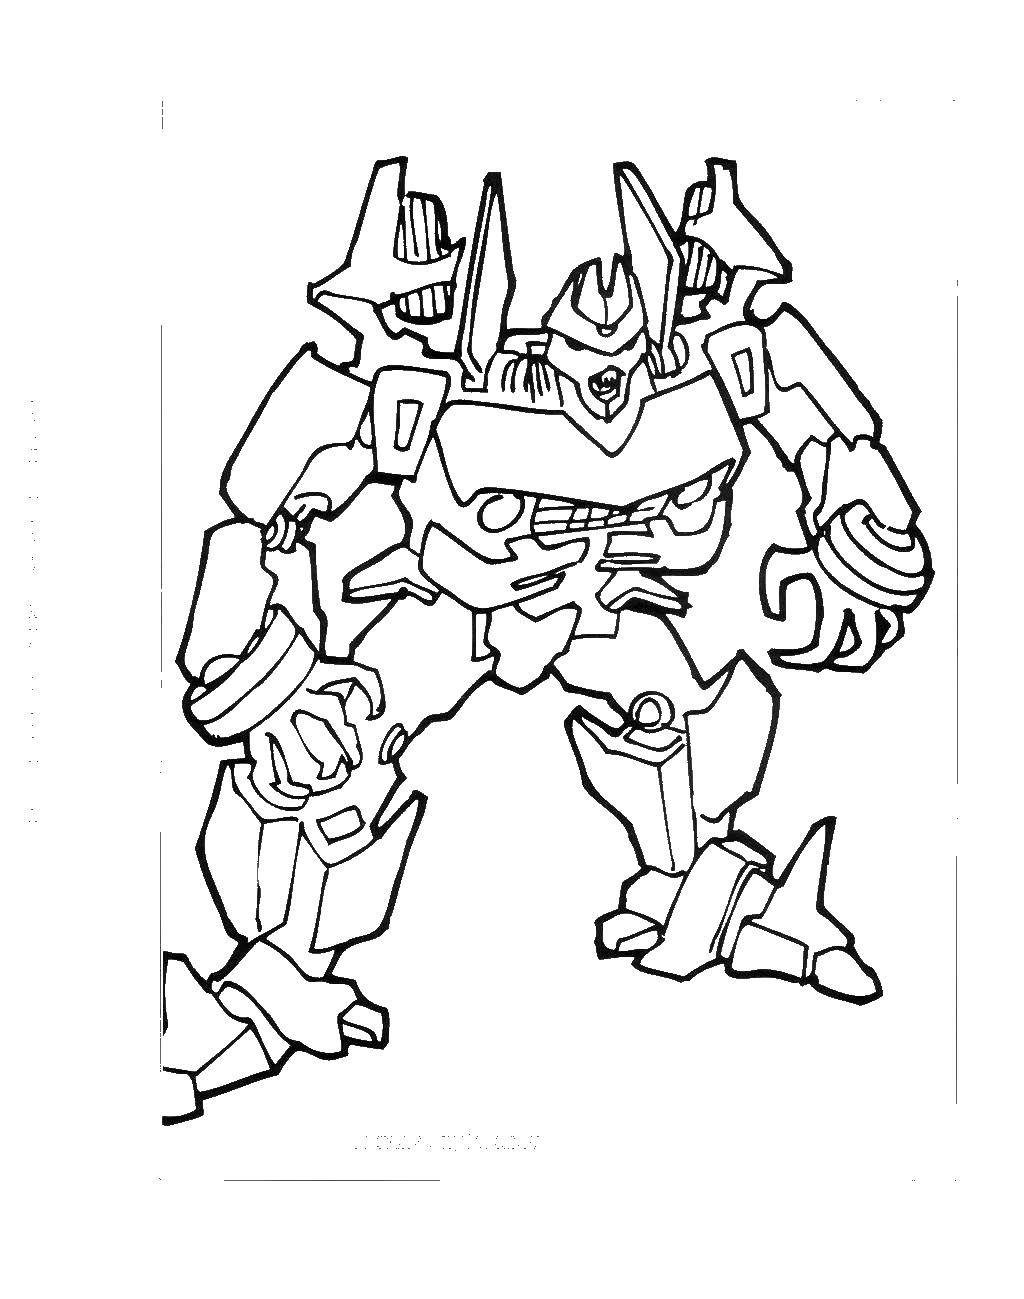 Coloring Angry transformer. Category robots. Tags:  robots transforer.